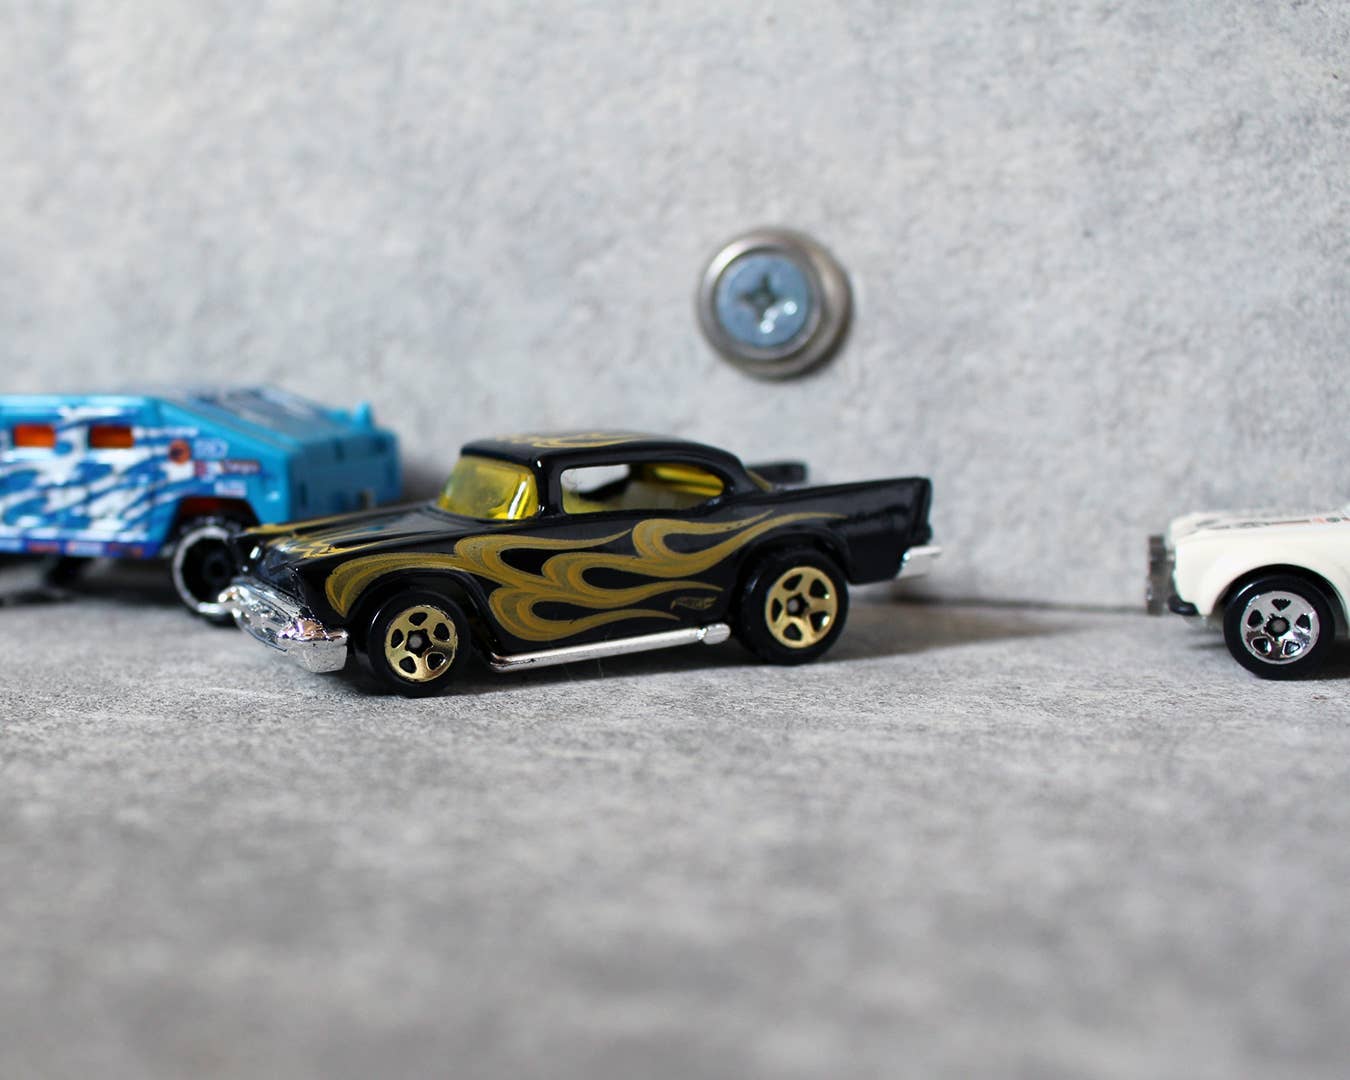 A Hot Wheels hot rod with flames parallel parking.